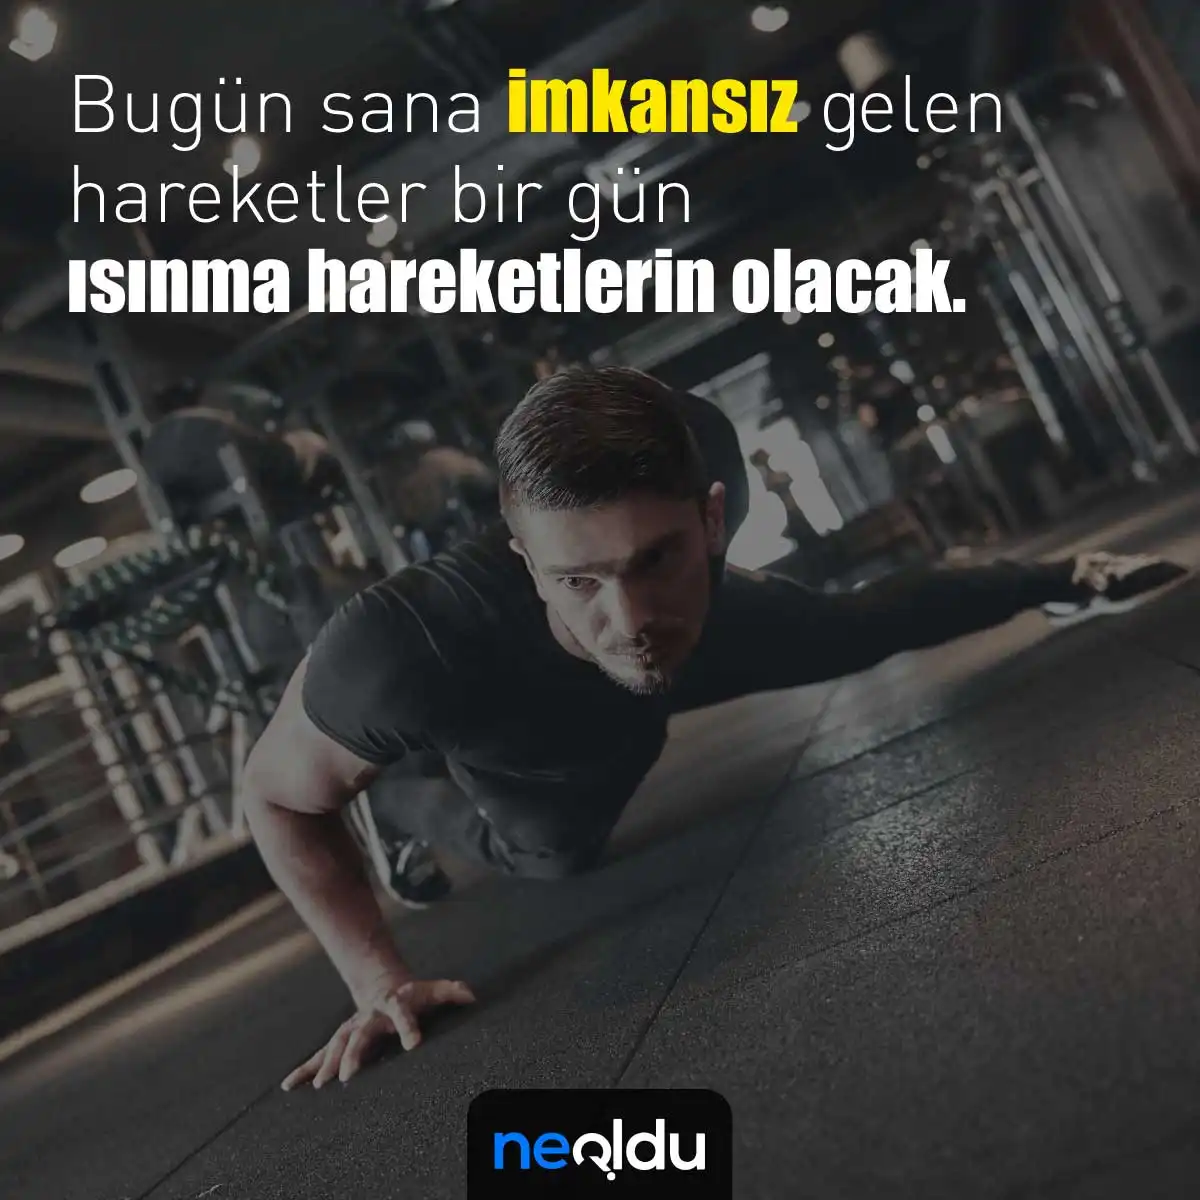 Fitness Quotes